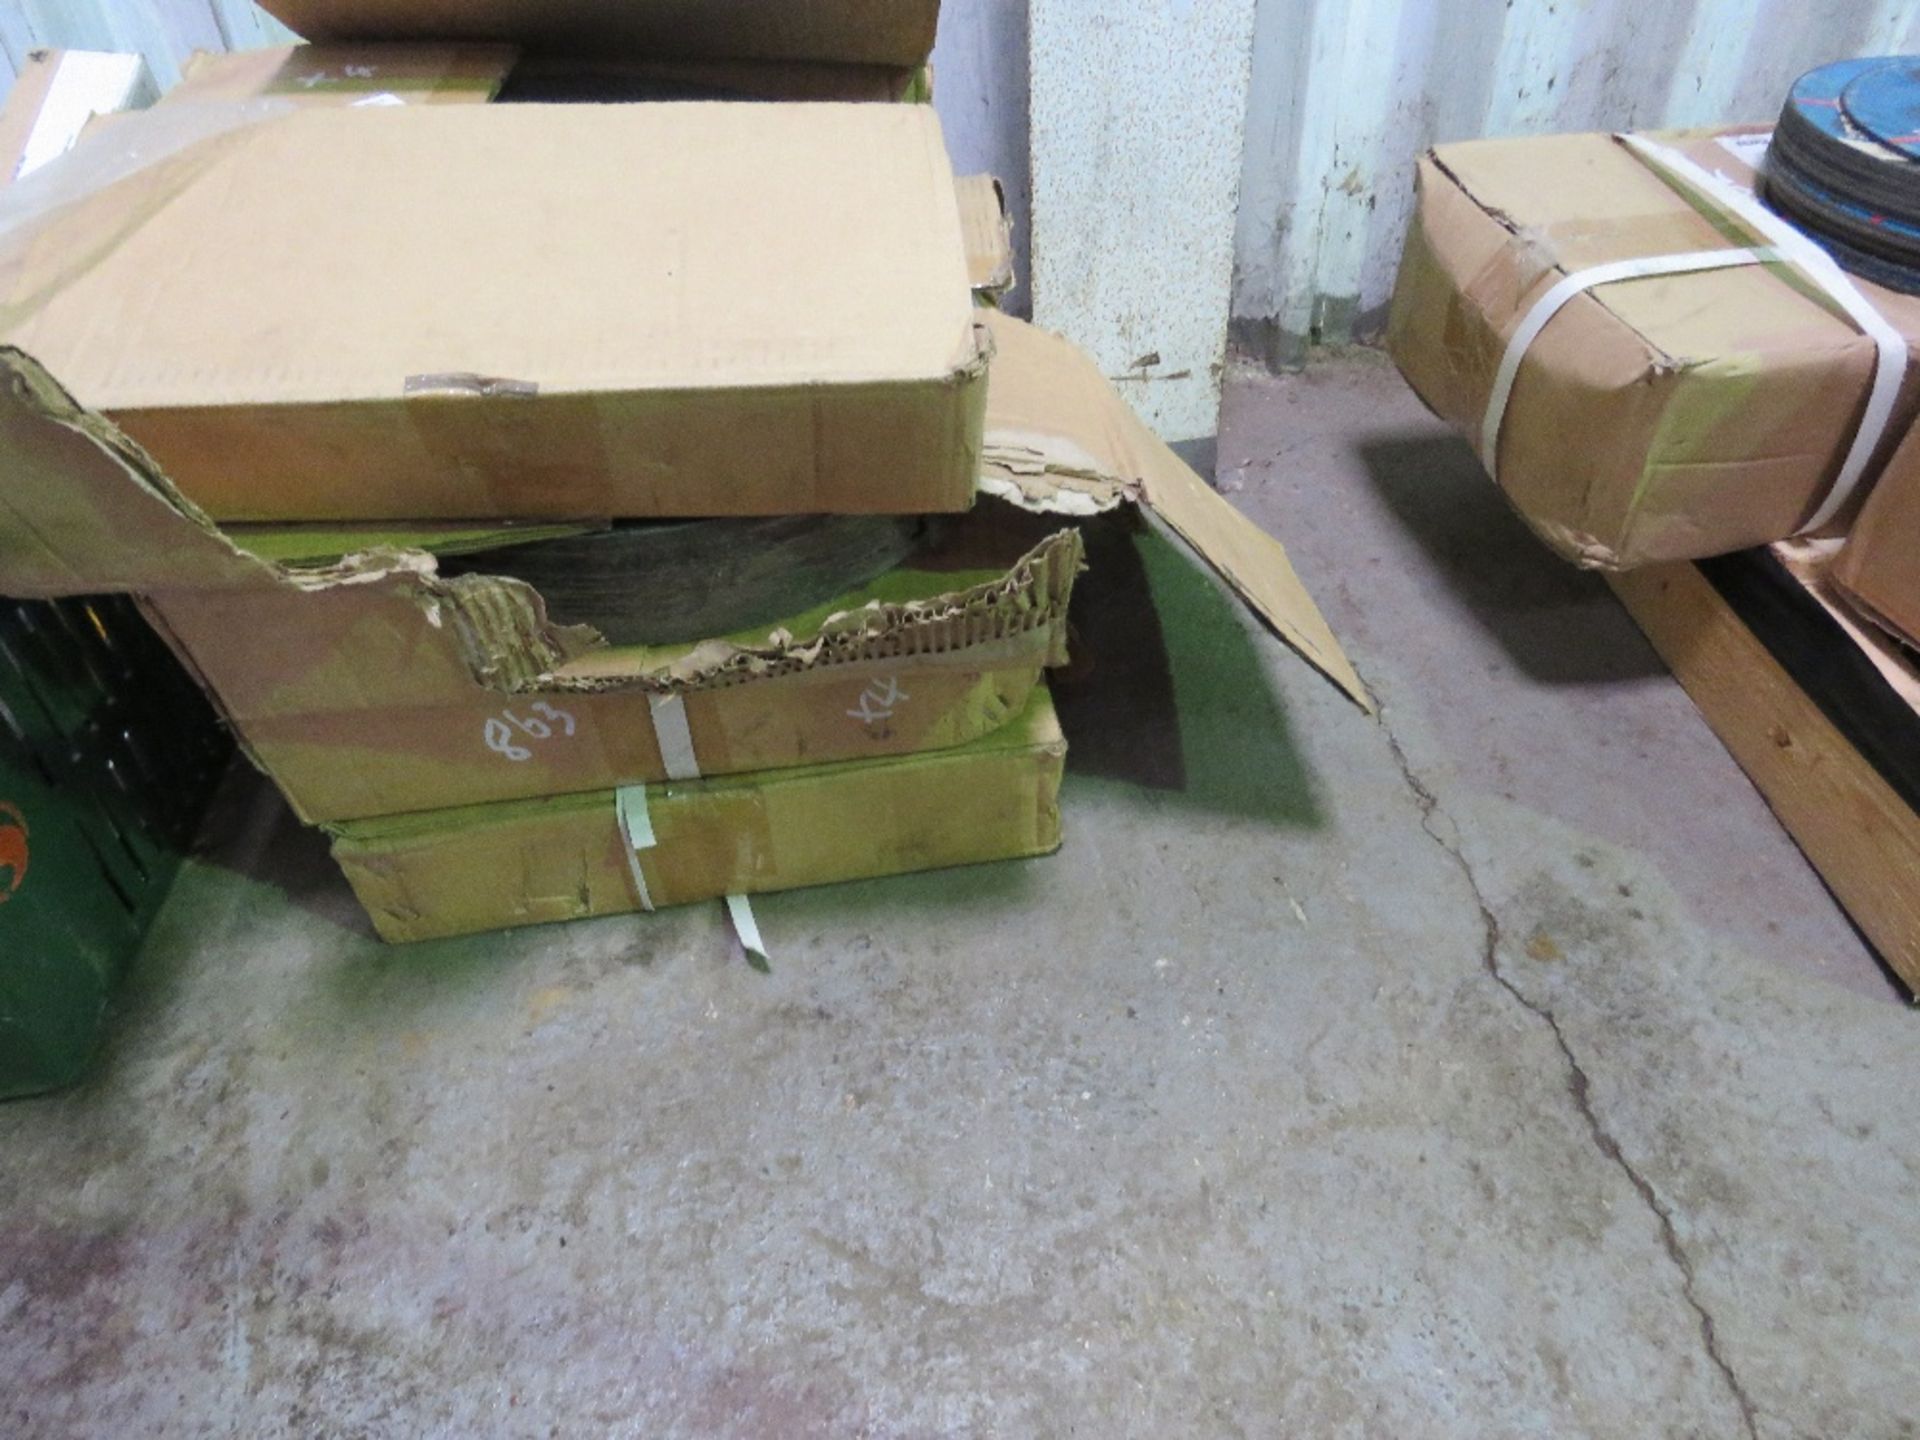 4 X BOXES OF 355 X 4 X 25.4MM FLAT STONE CUTTING DISCS, 60 NO. APPROX IN TOTAL.